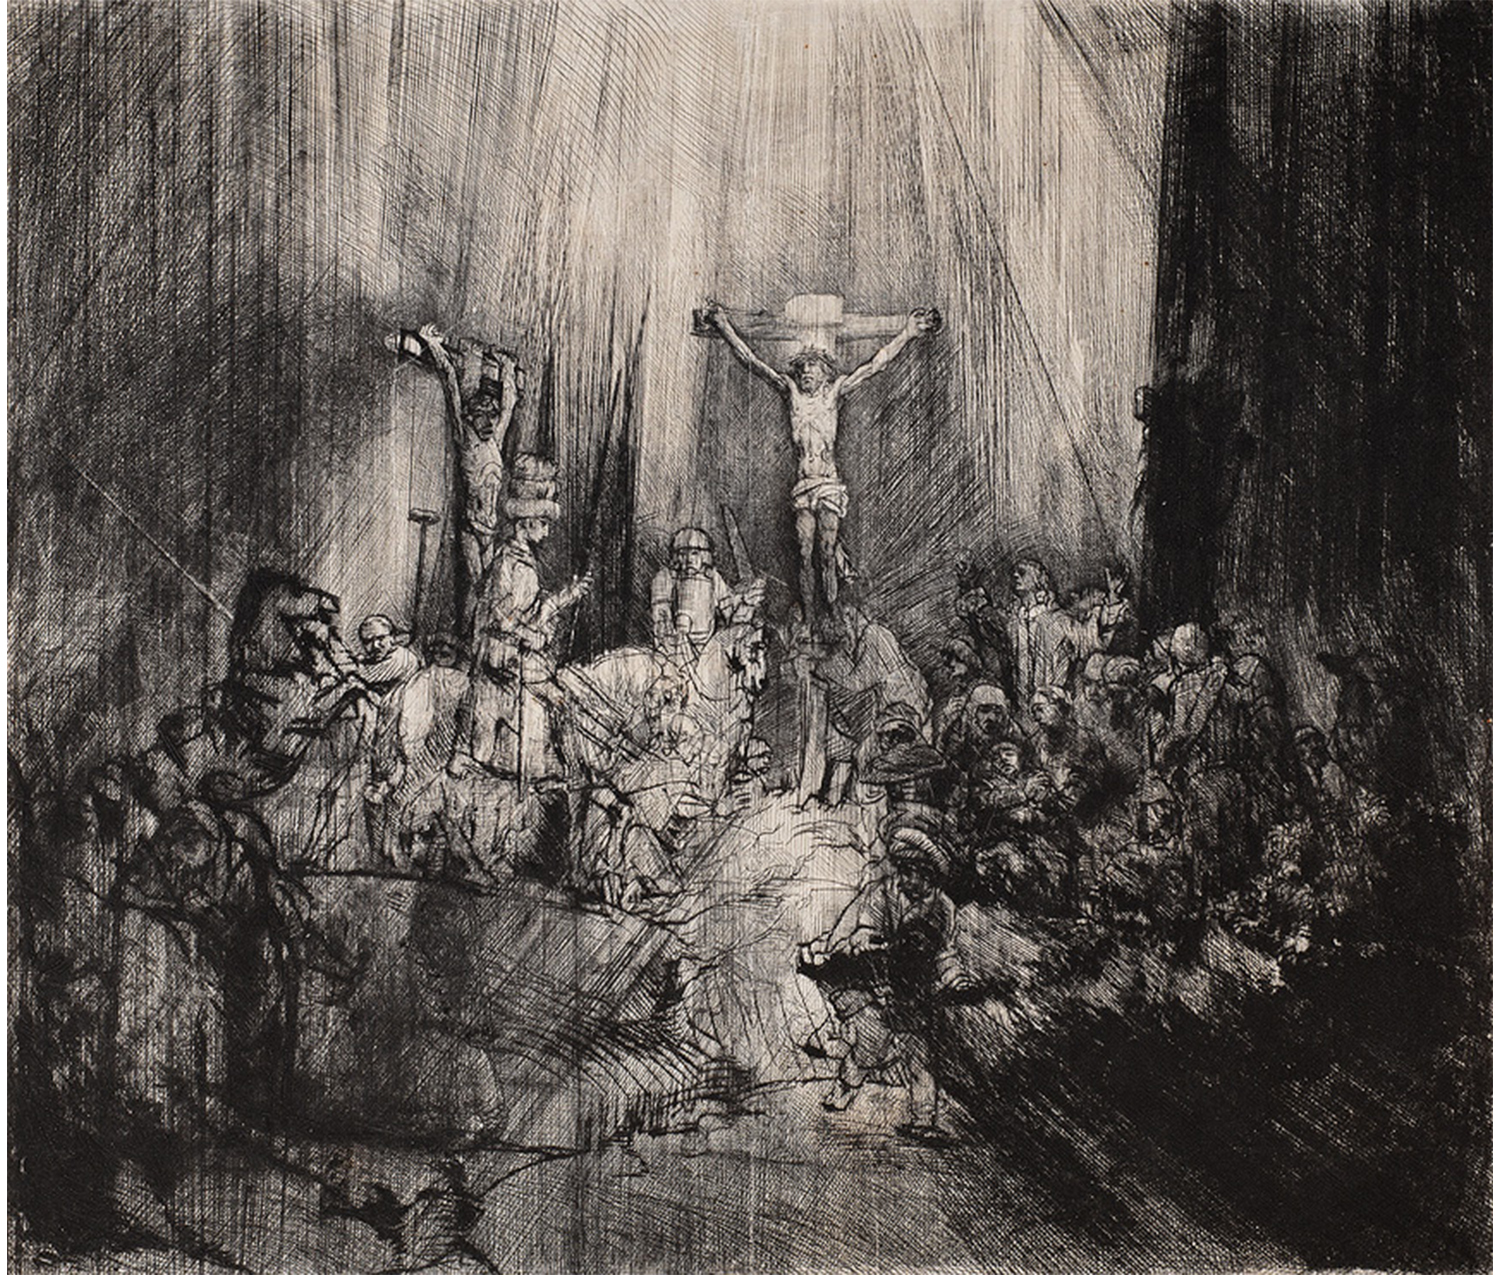 Christ on the cross, with a crowd below him